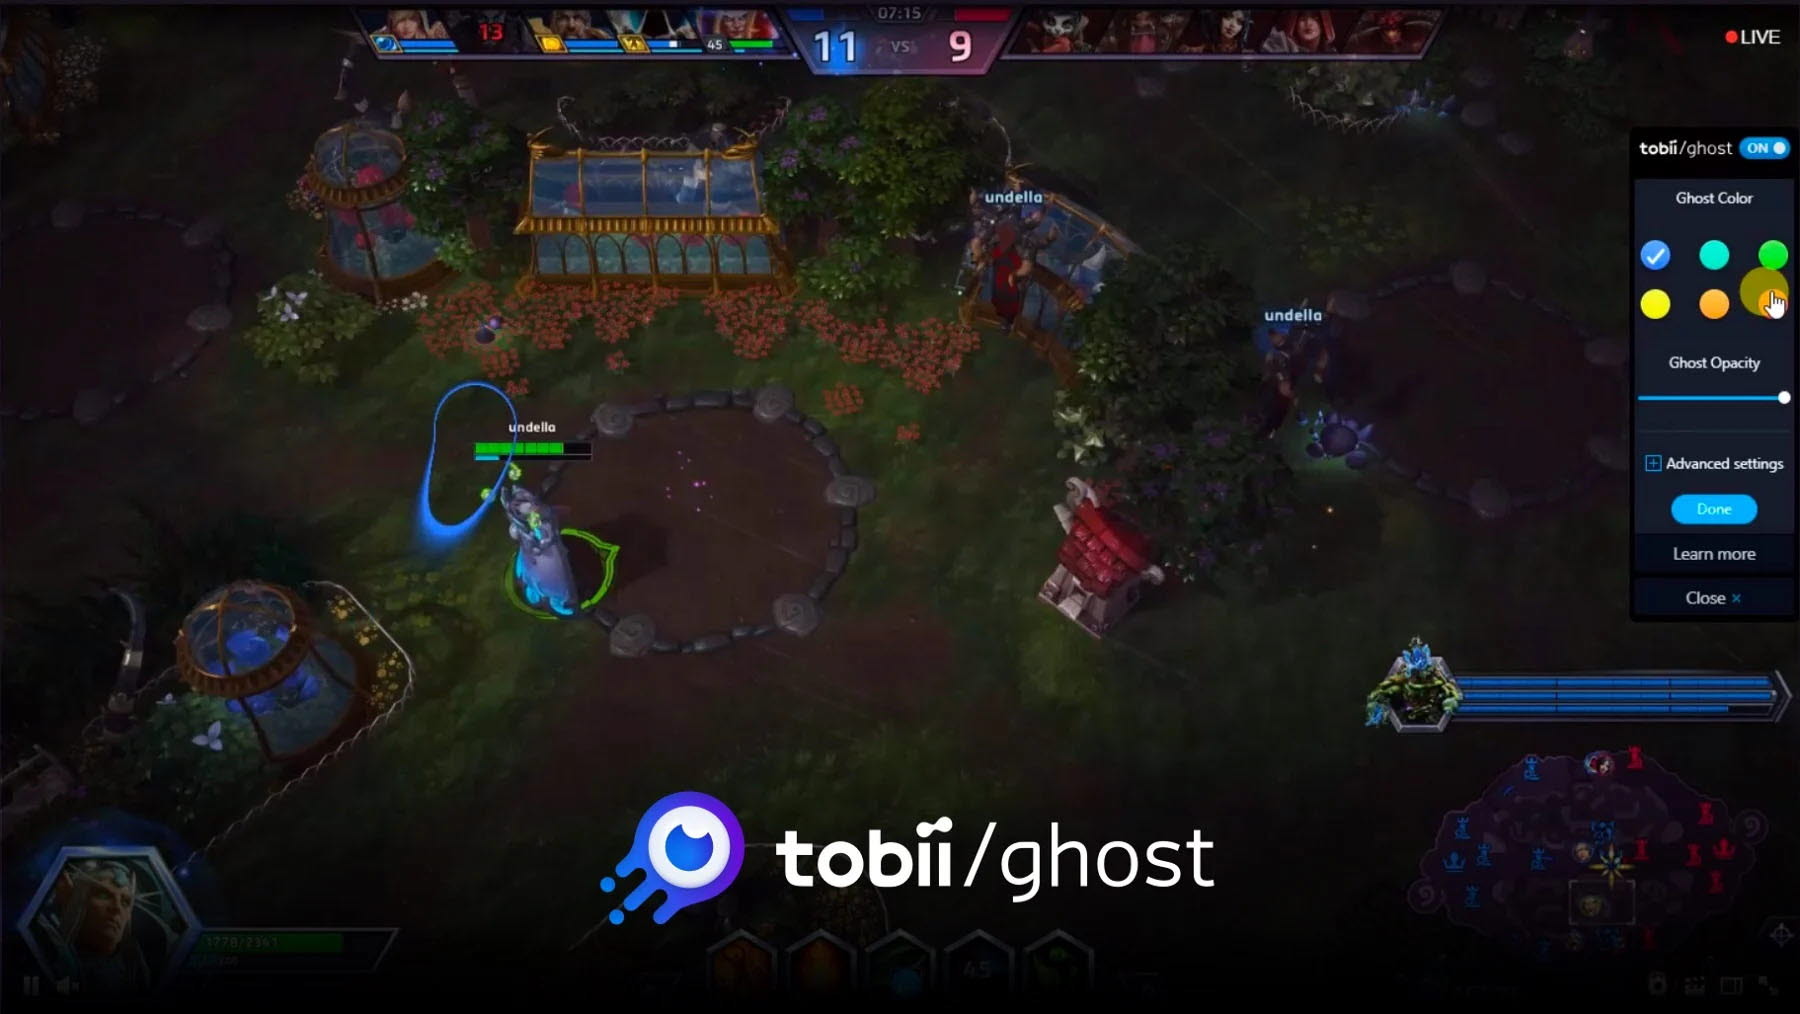 Tobii Ghost